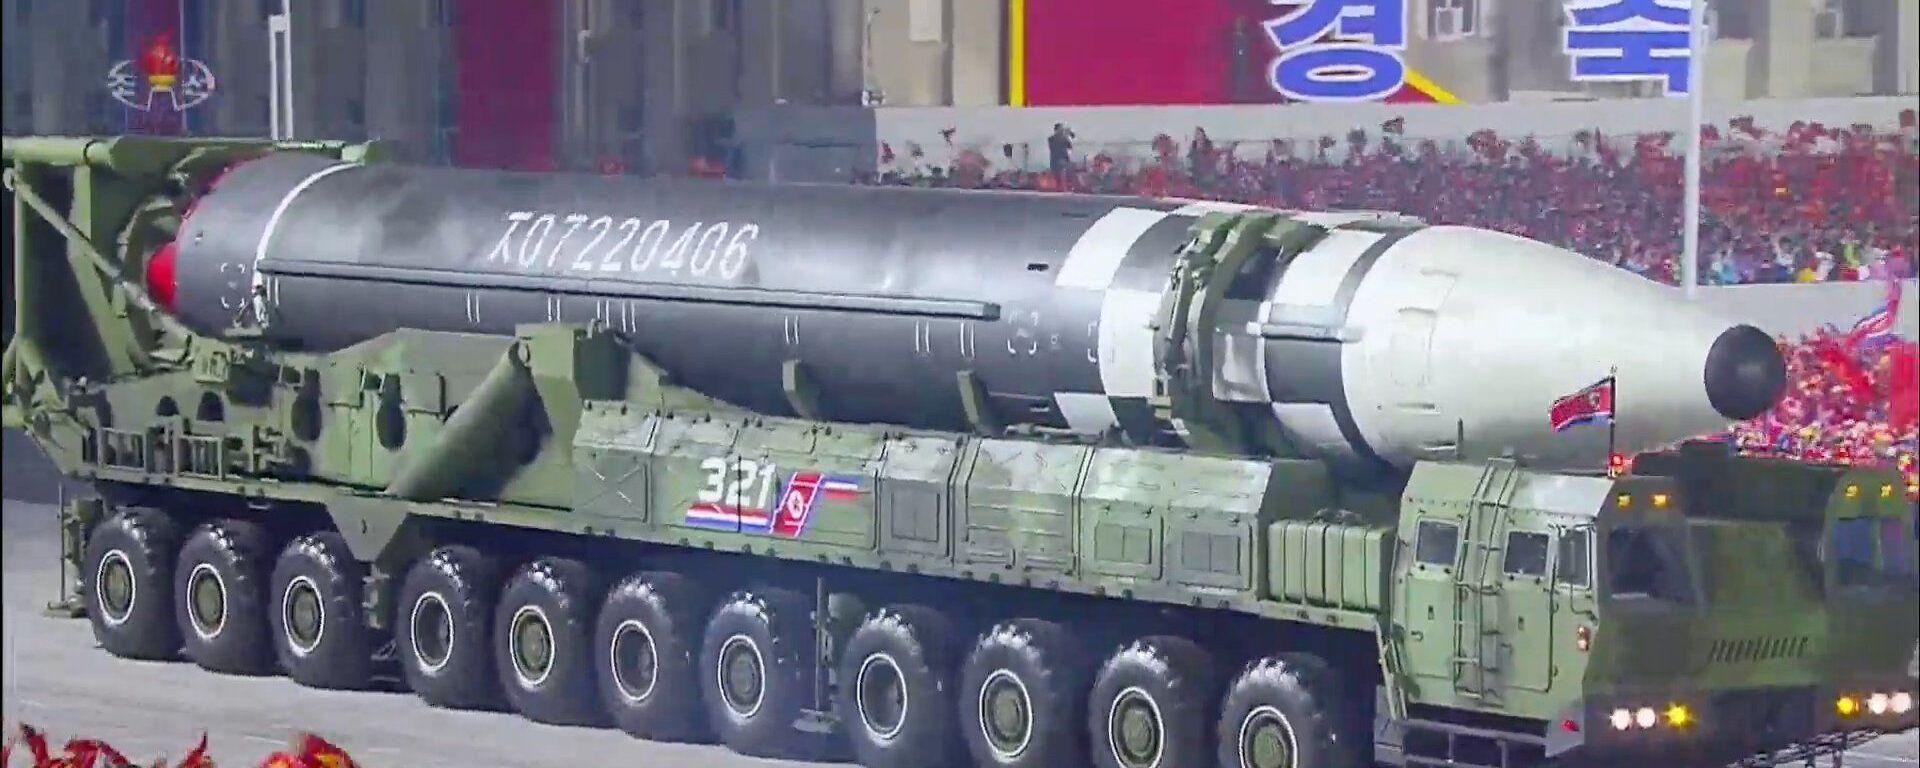 Screengrab of North Korean television showing massive new, never-before-seen ICBM in Pyongyang at celebrations marking the 75th anniversary of the founding of the Democratic People's Republic of Korea, Saturday, October 10, 2020. - Sputnik International, 1920, 10.02.2023